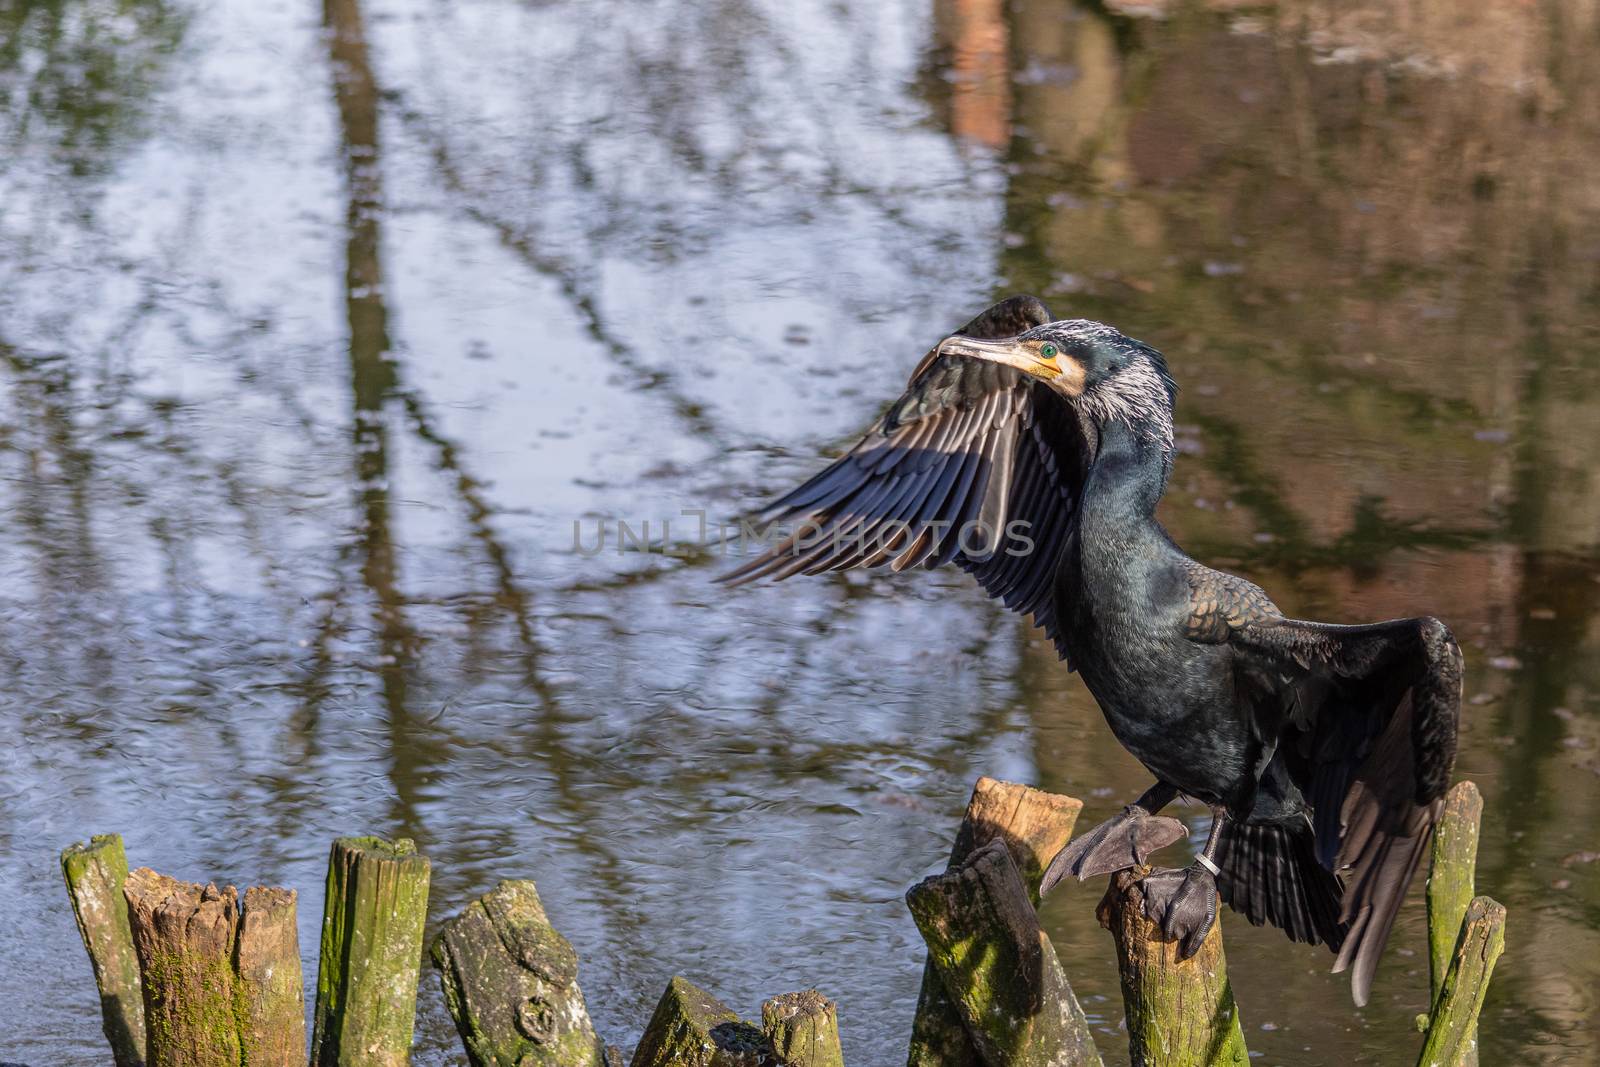 Common cormorant dries the plumage resting on branches that emerge from the water of a pond